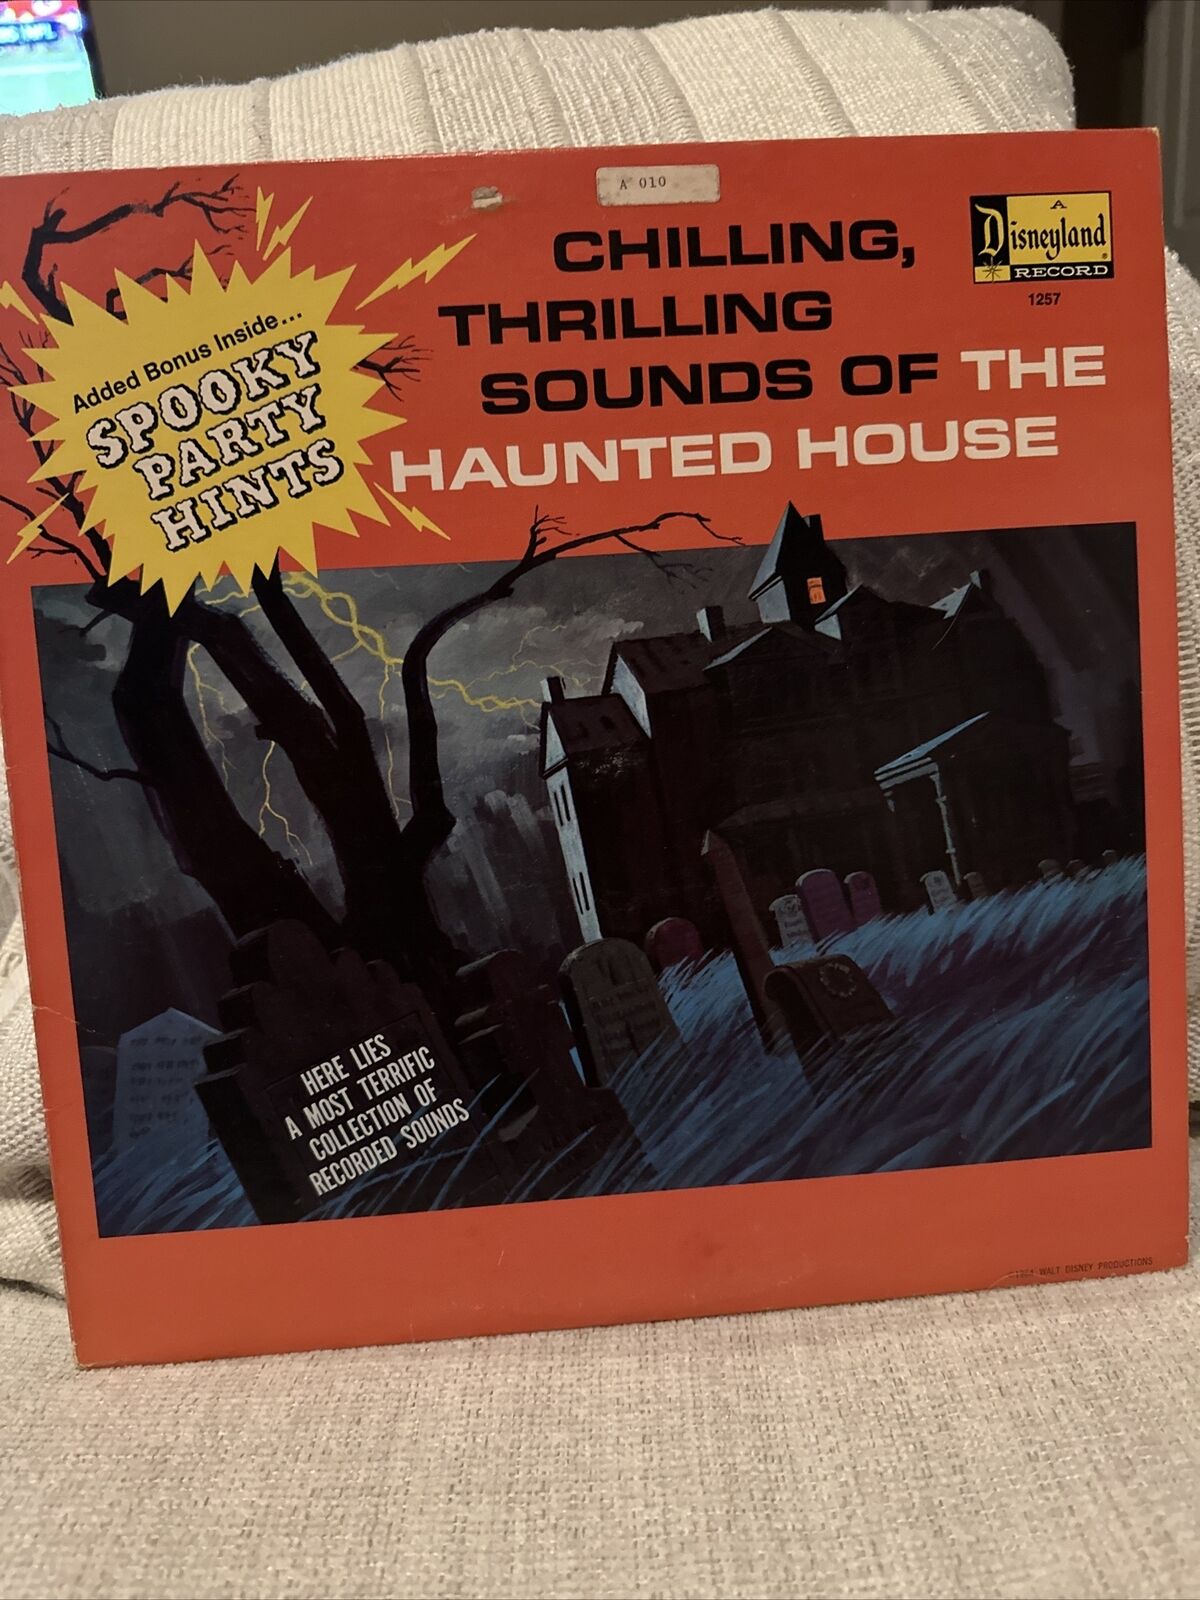 Chilling Thrilling Sounds Of The Haunted House LP DQ-1257 1964 Record Halloween